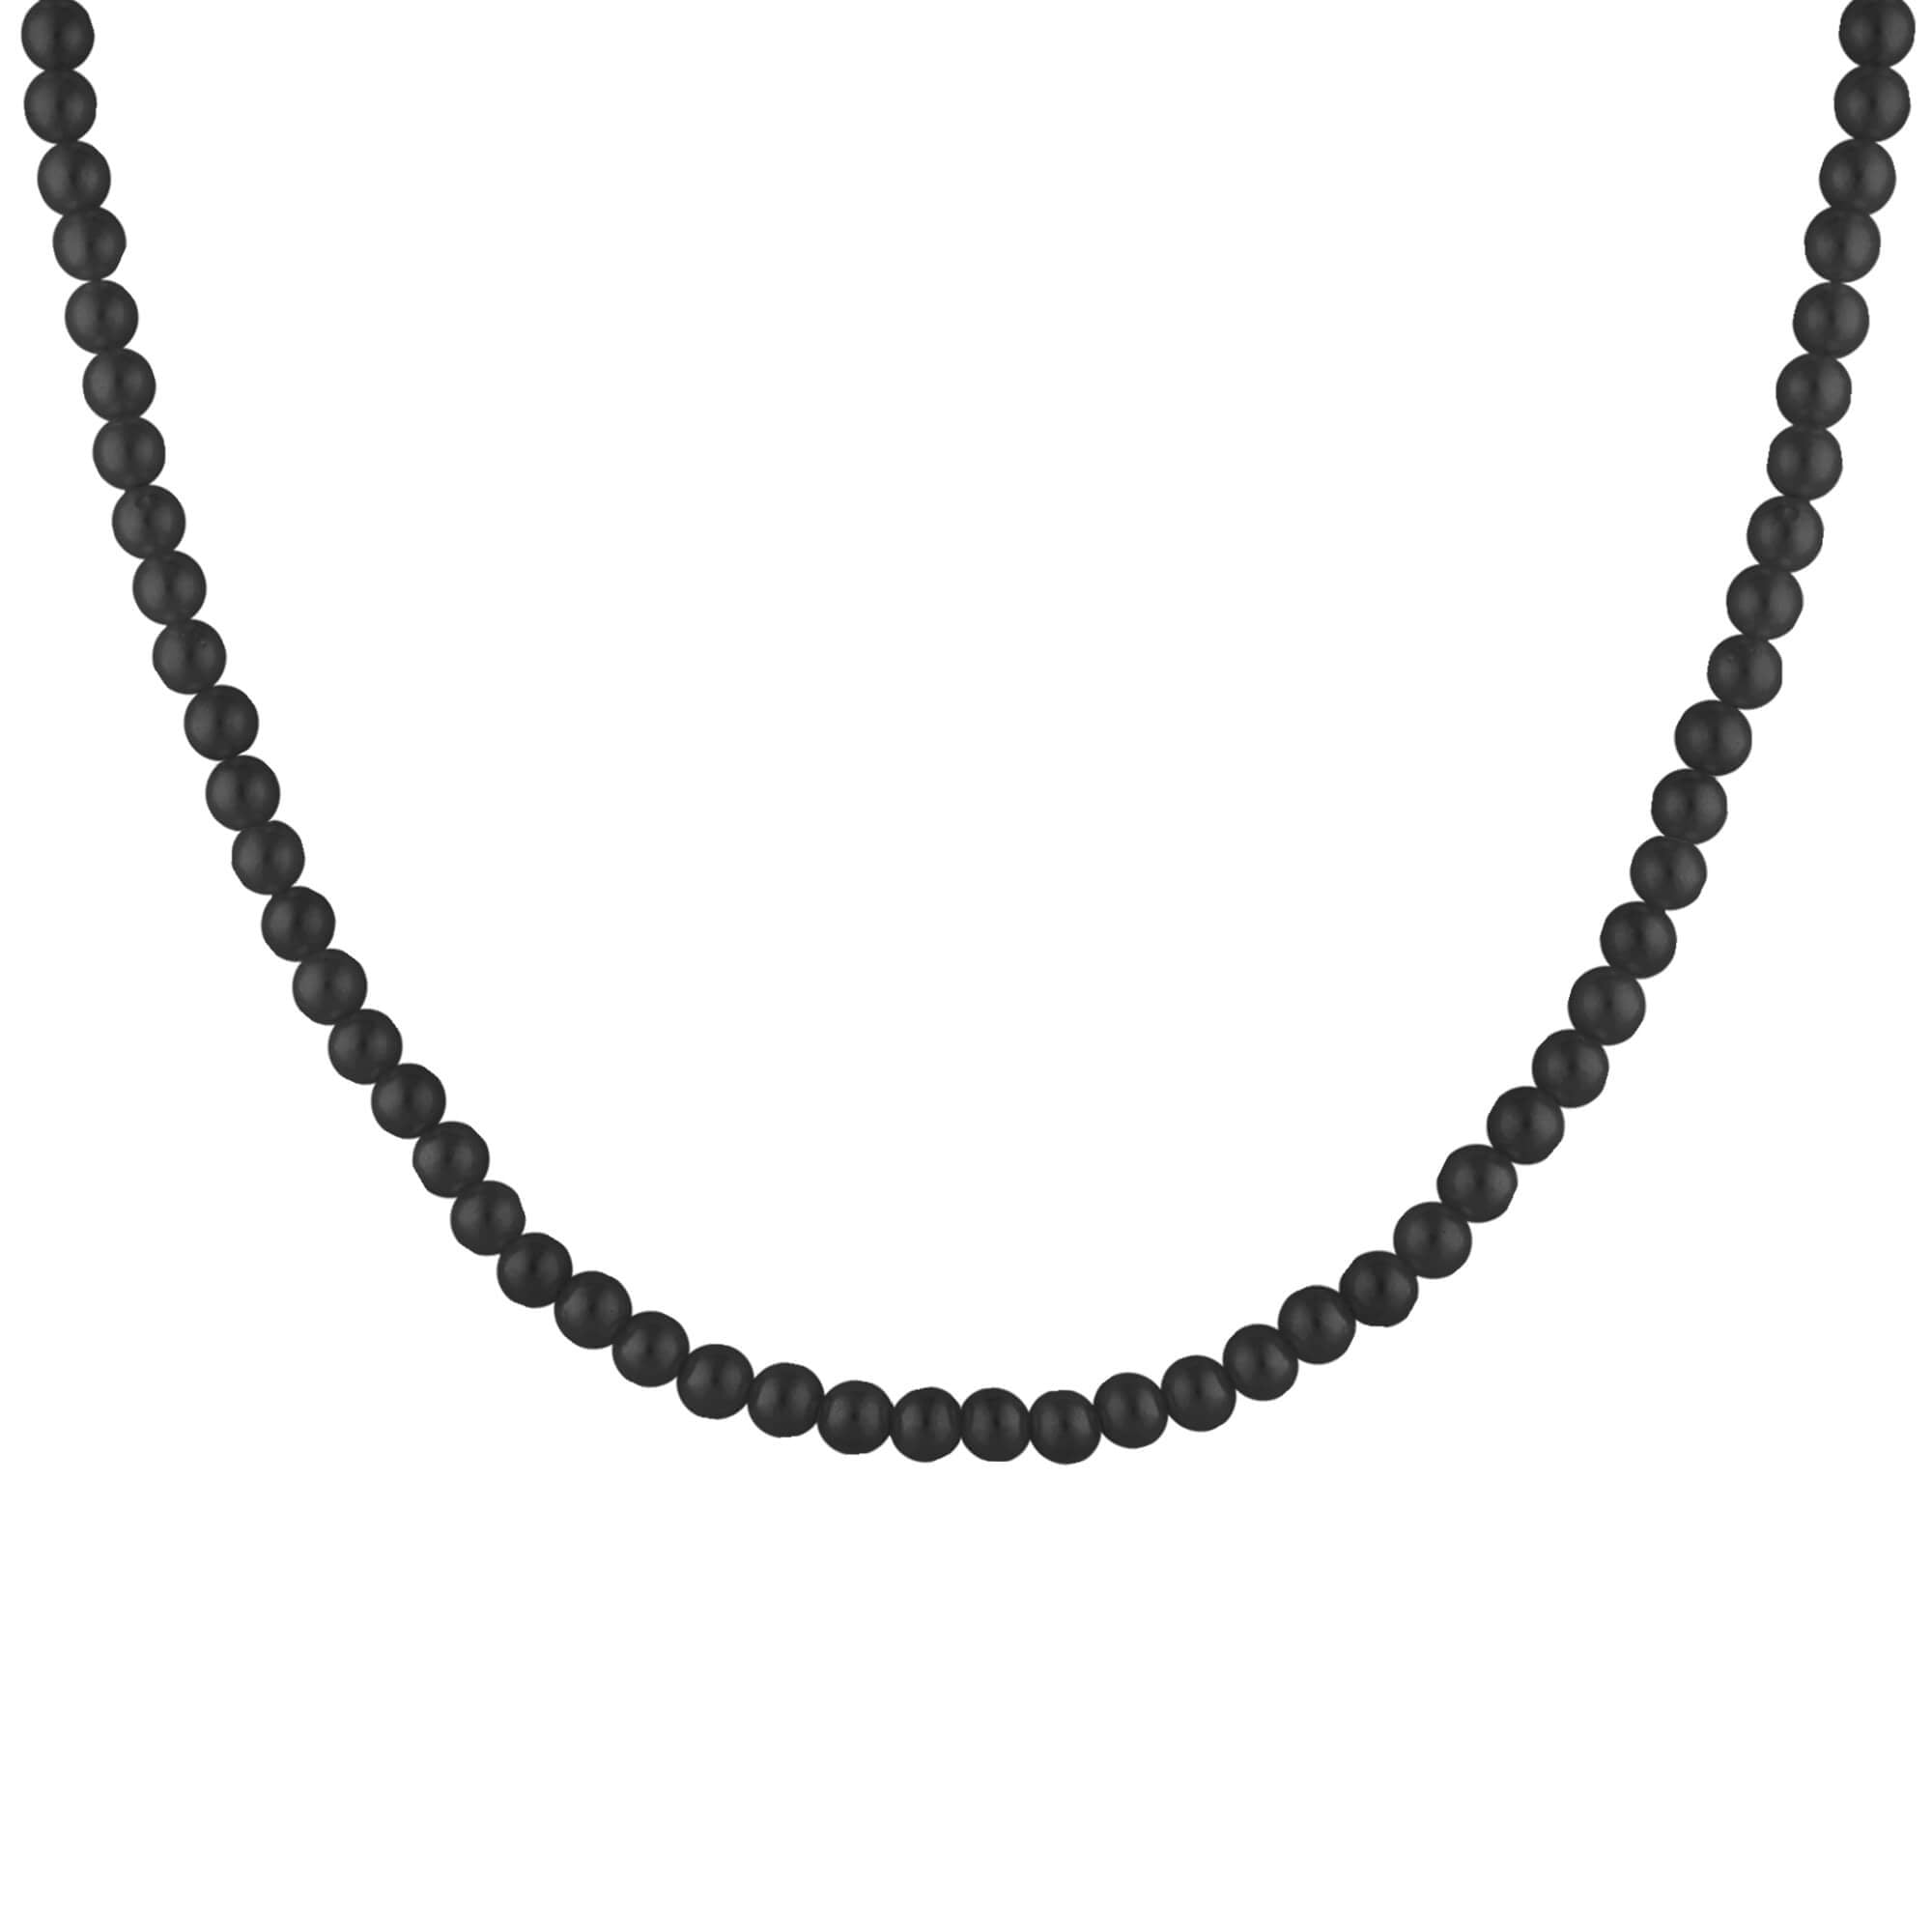 Dark Var women's necklace by Five Jwlry, designed with black onyx stone pearls complemented by a black stainless steel buckle. Available in sizes 45cm and 50cm. Crafted from water-resistant 316L stainless steel. Hypoallergenic with a 2-year warranty.